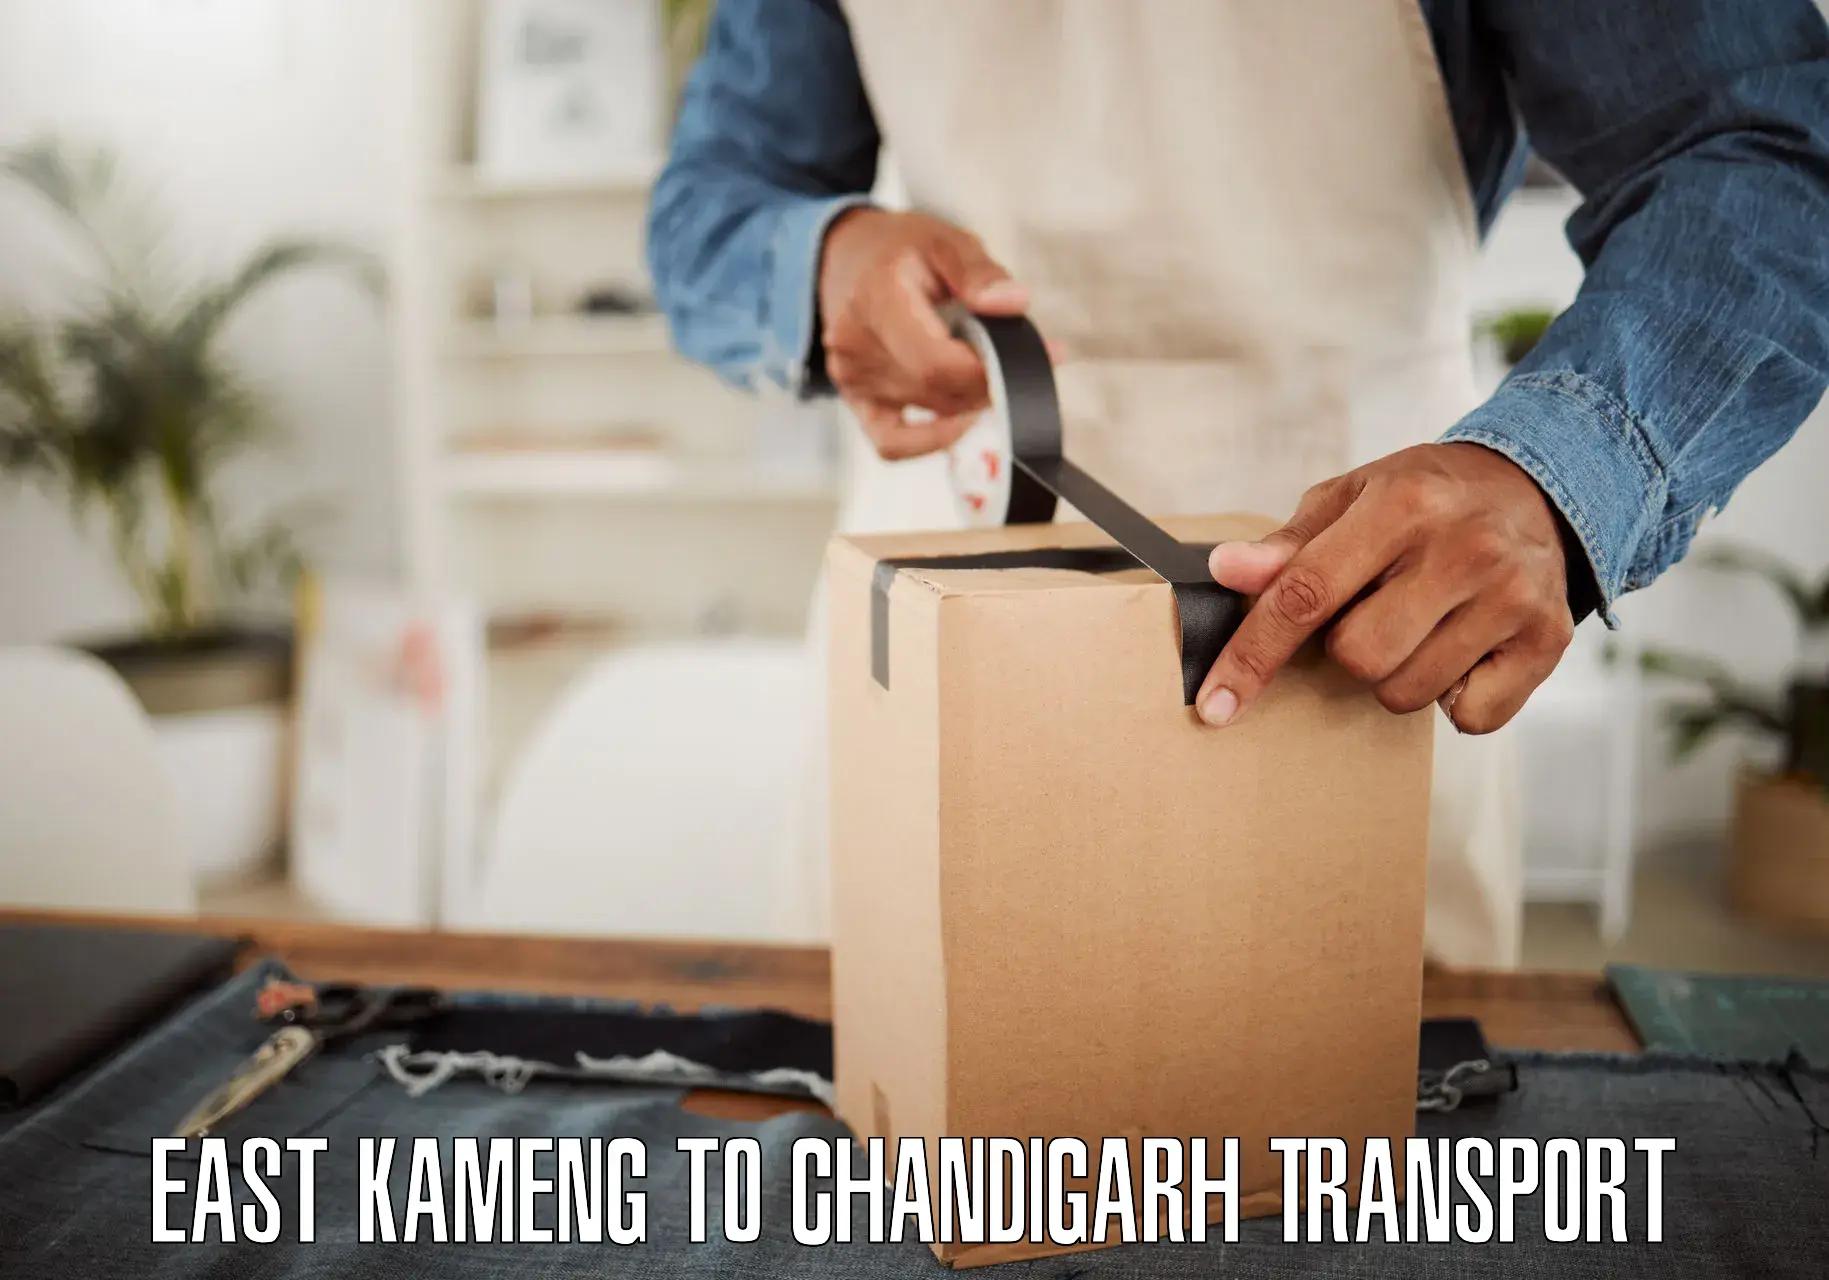 Express transport services in East Kameng to Chandigarh